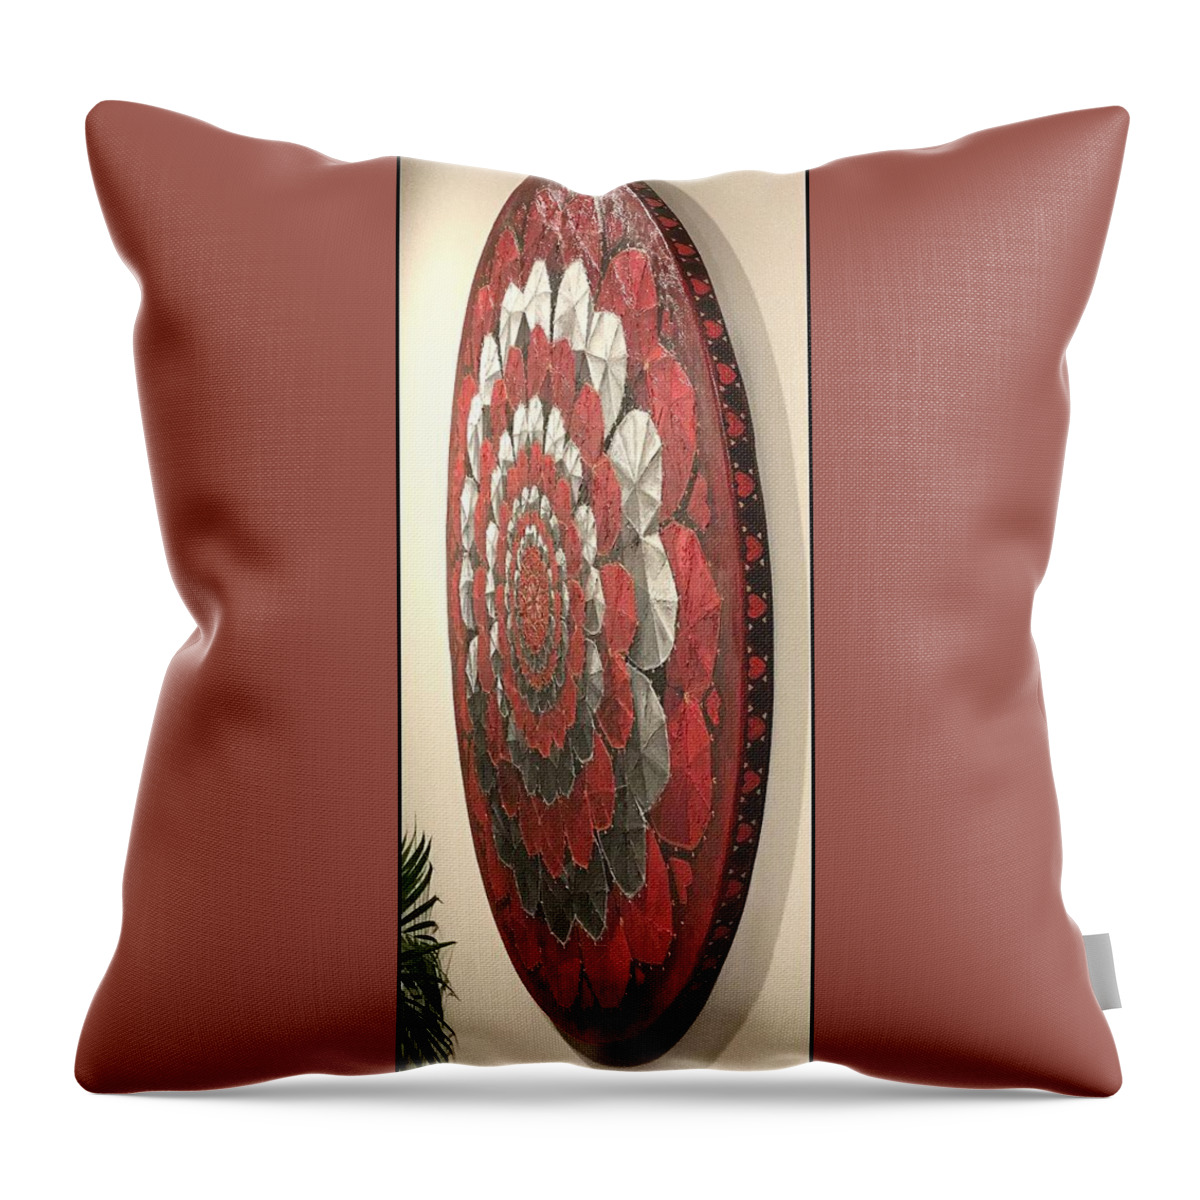  Throw Pillow featuring the painting Eternal Hearts by James Lanigan Thompson MFA